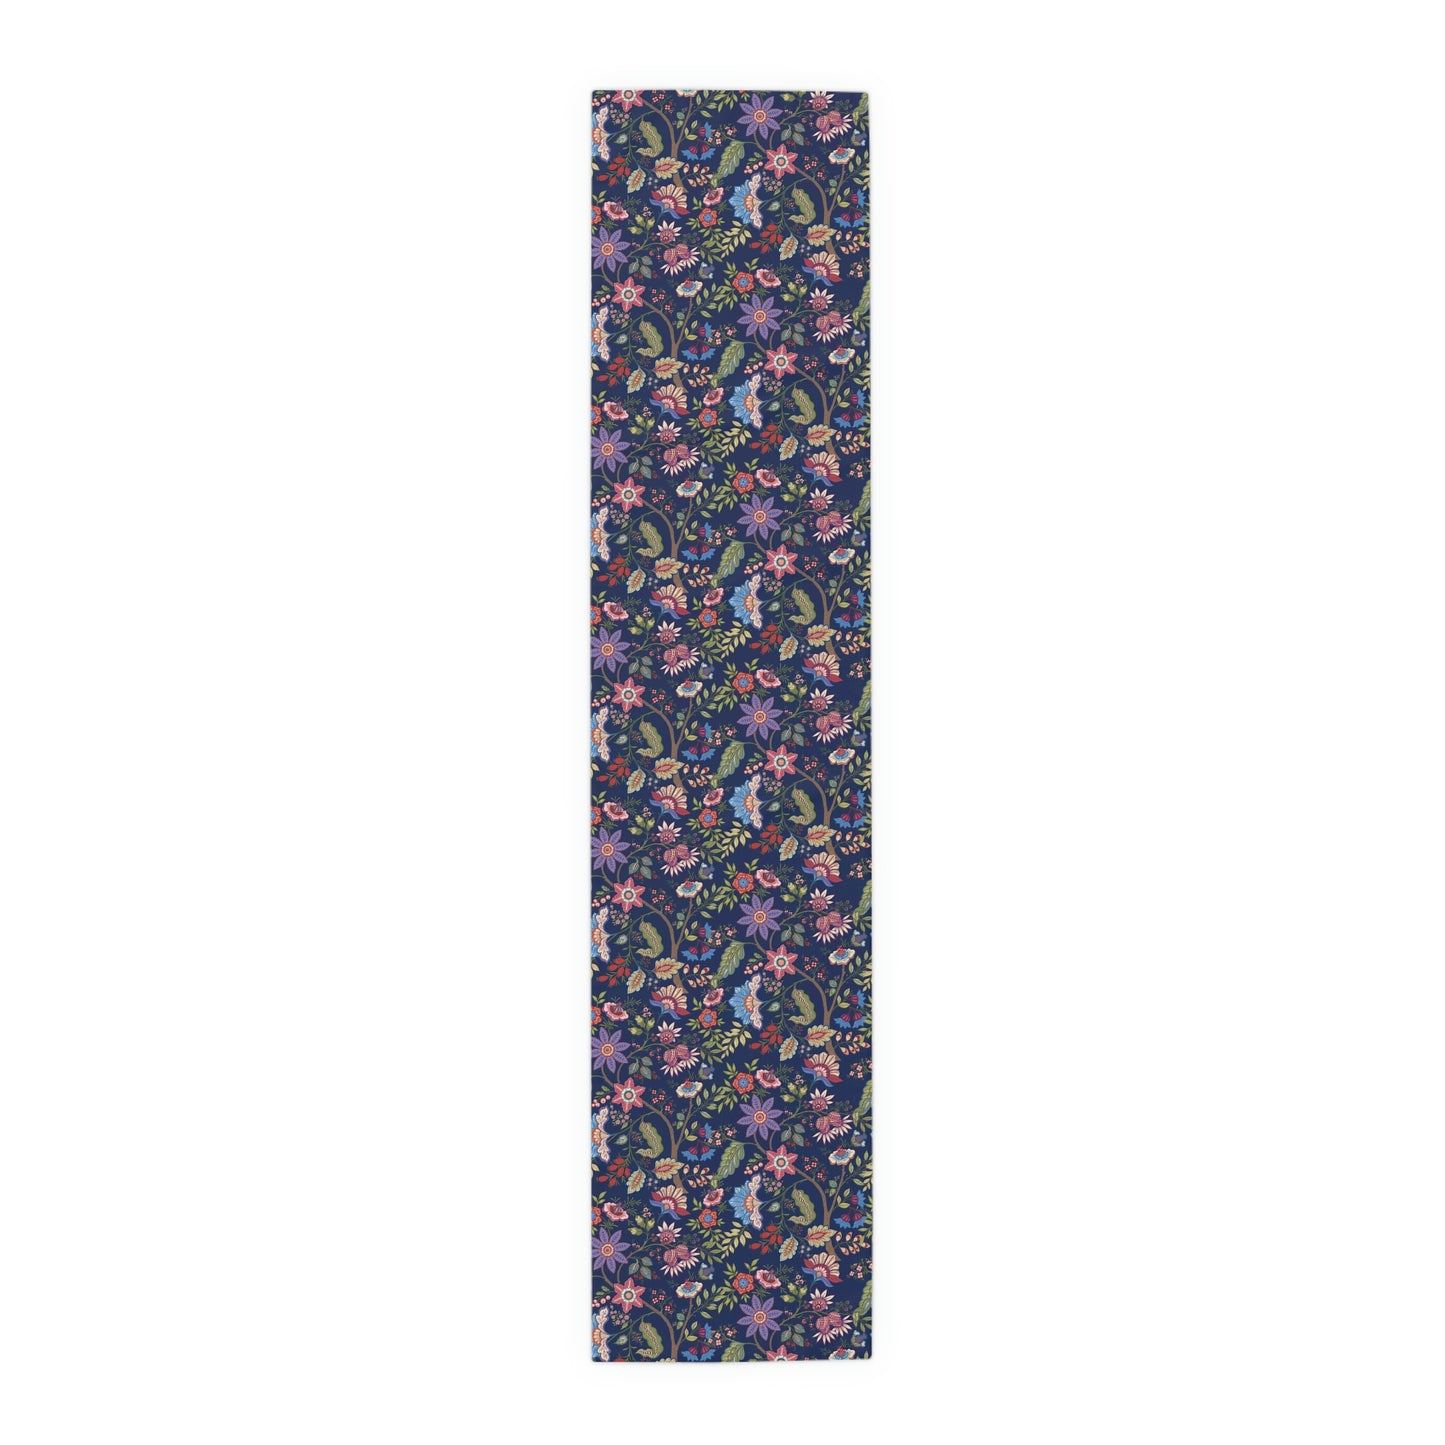 Jacobean Flowers Table Runner (Cotton, Poly)